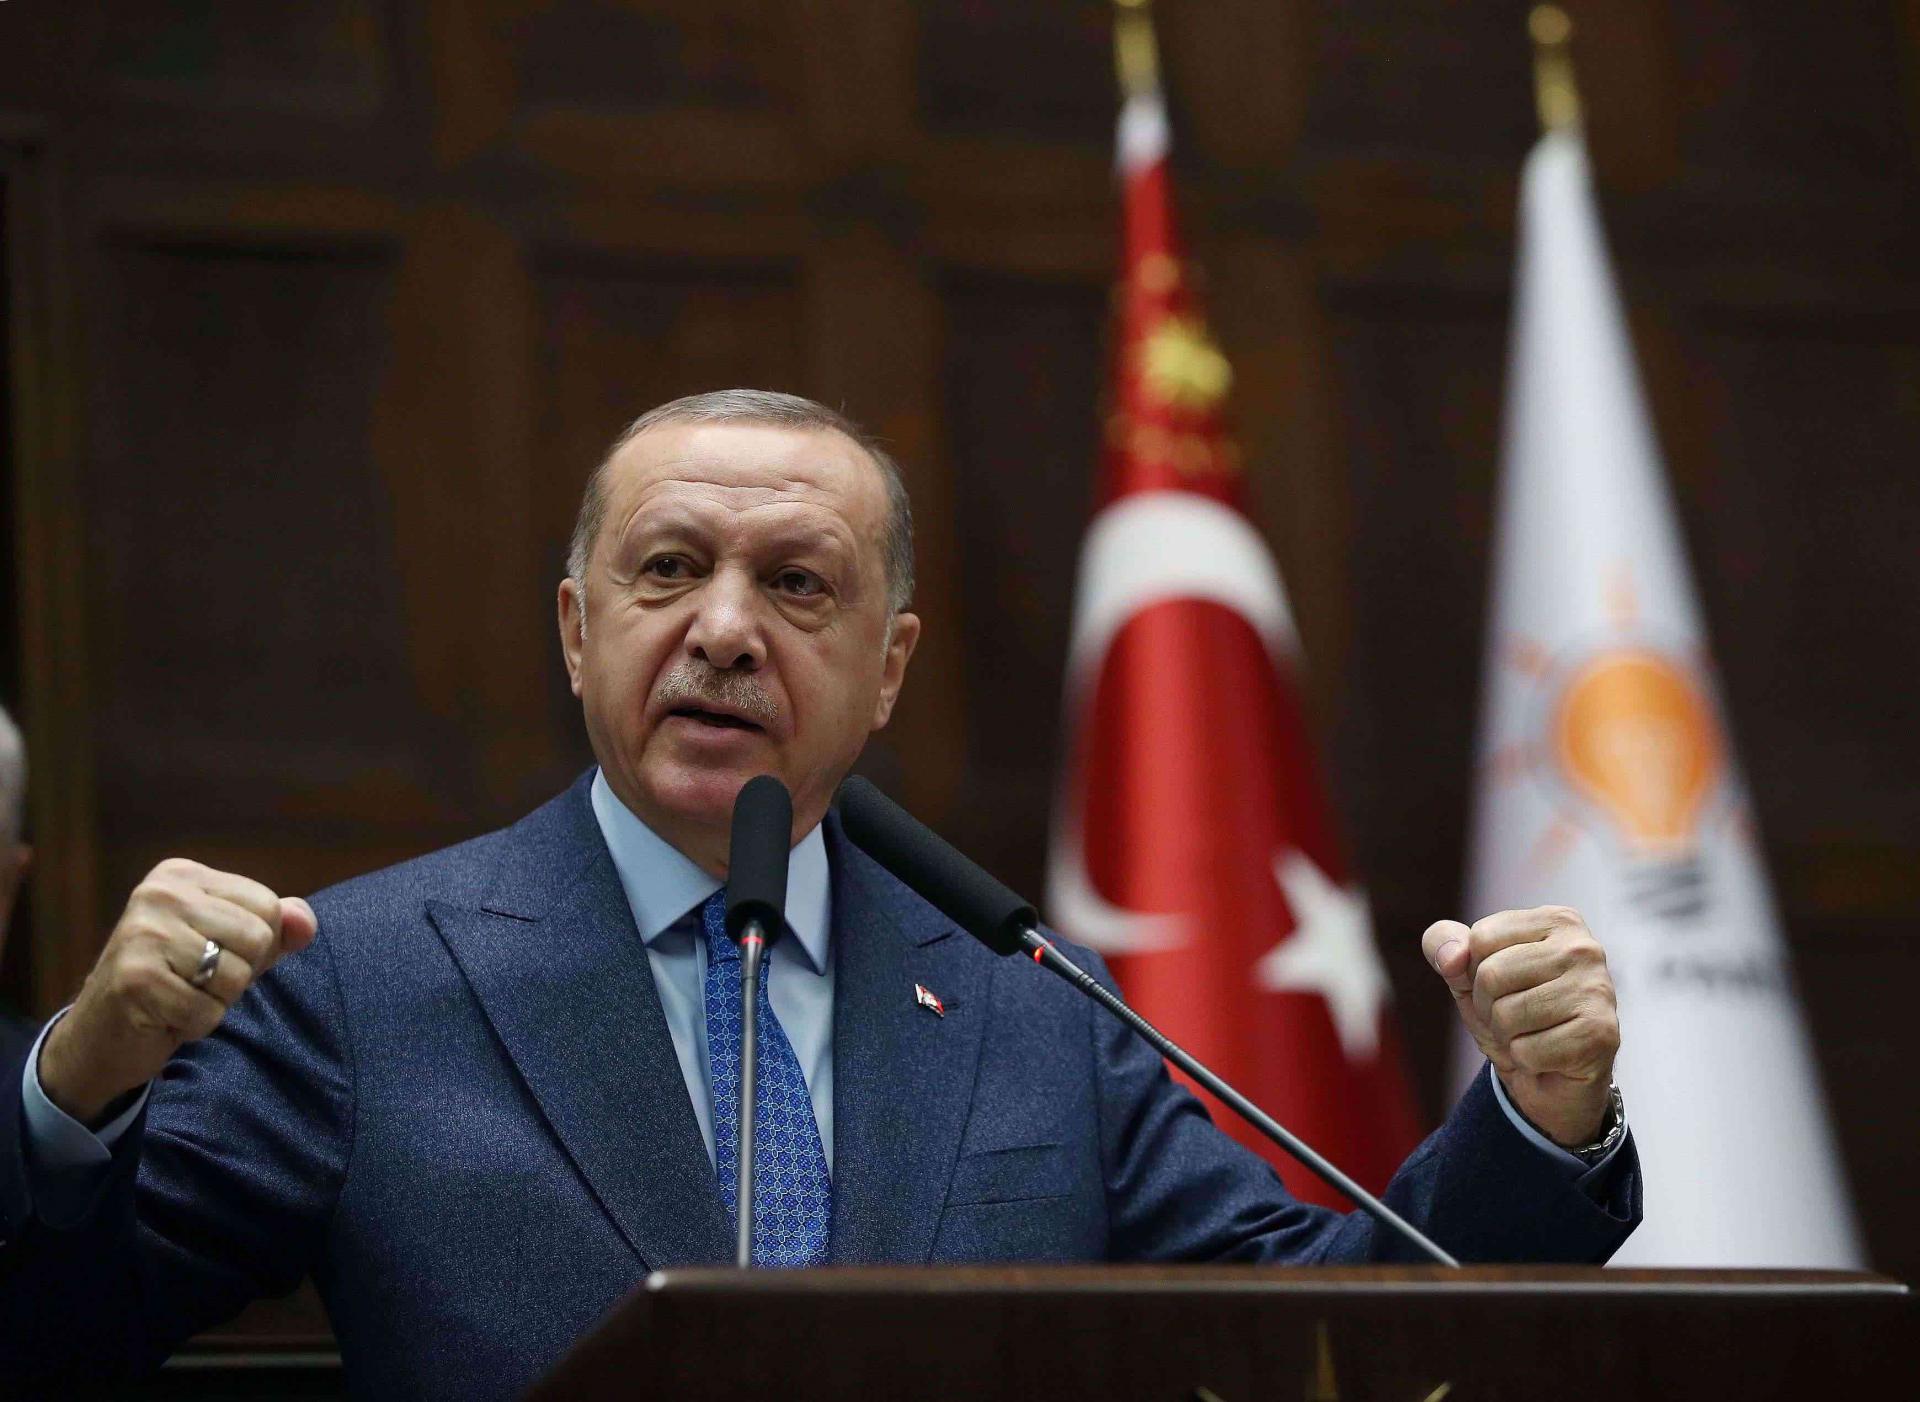 Erdogan said he opened the gates in order to pressure Europe into providing greater assistance with the Syrian conflict